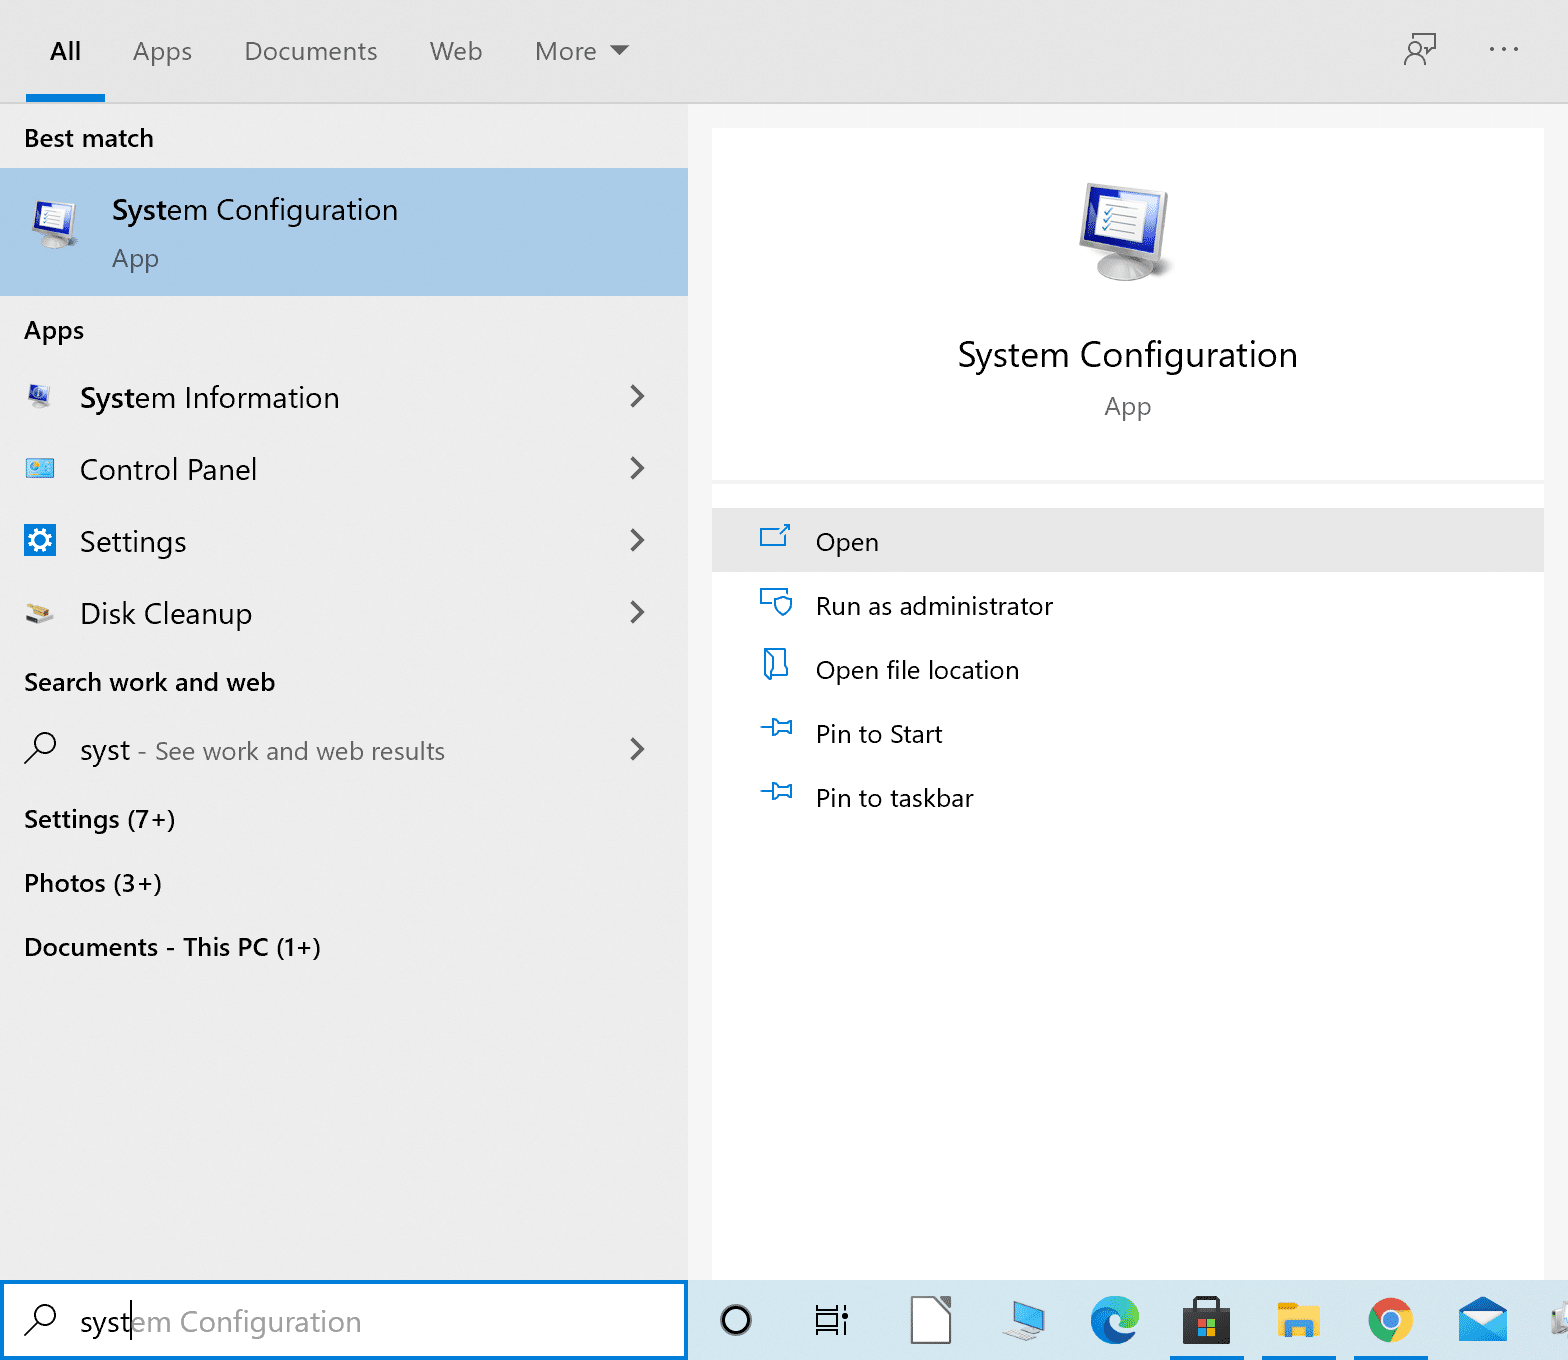 Type System Configuration in the Windows search bar